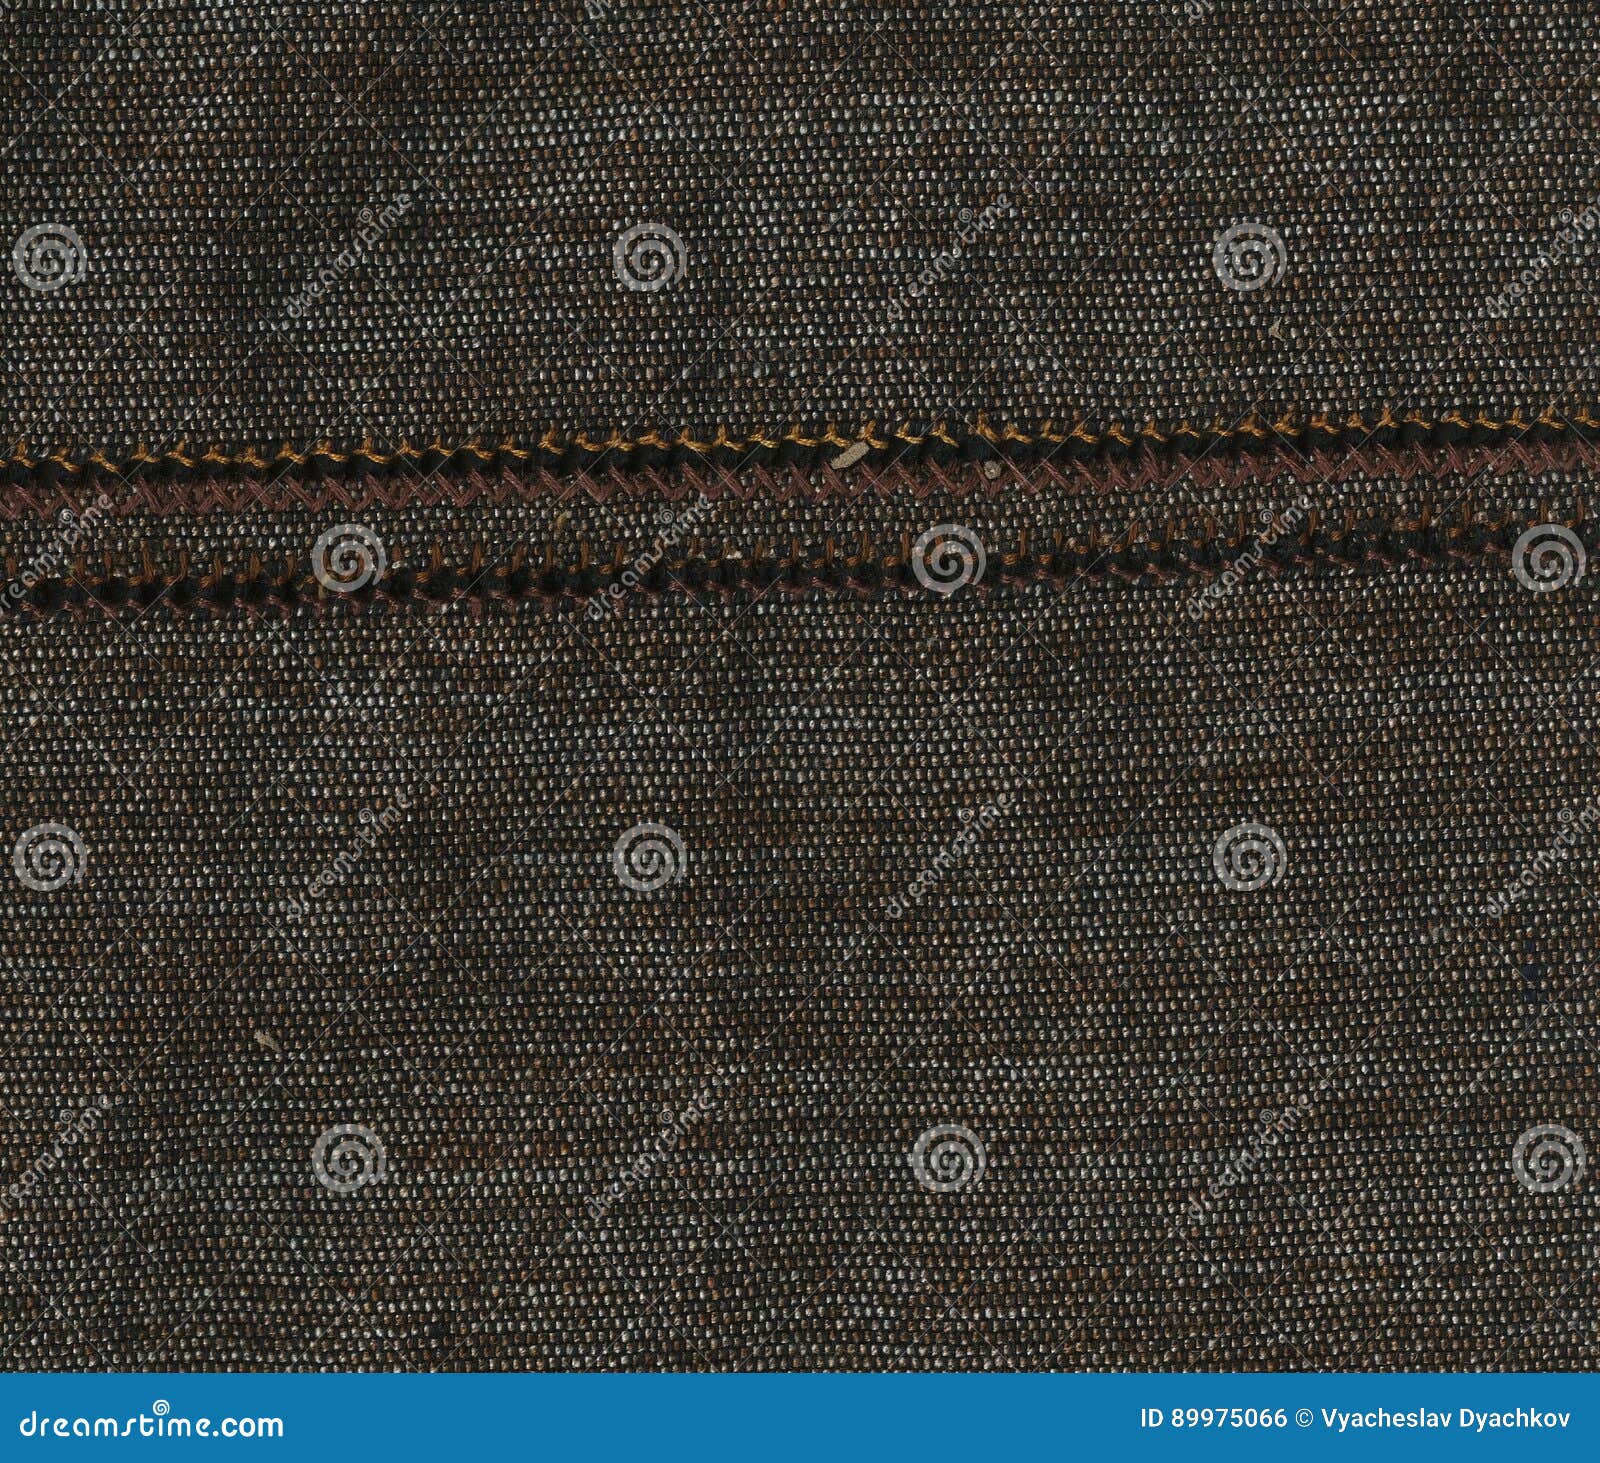 Abstraction For The Background Dark Brown Fabric With The Bulk